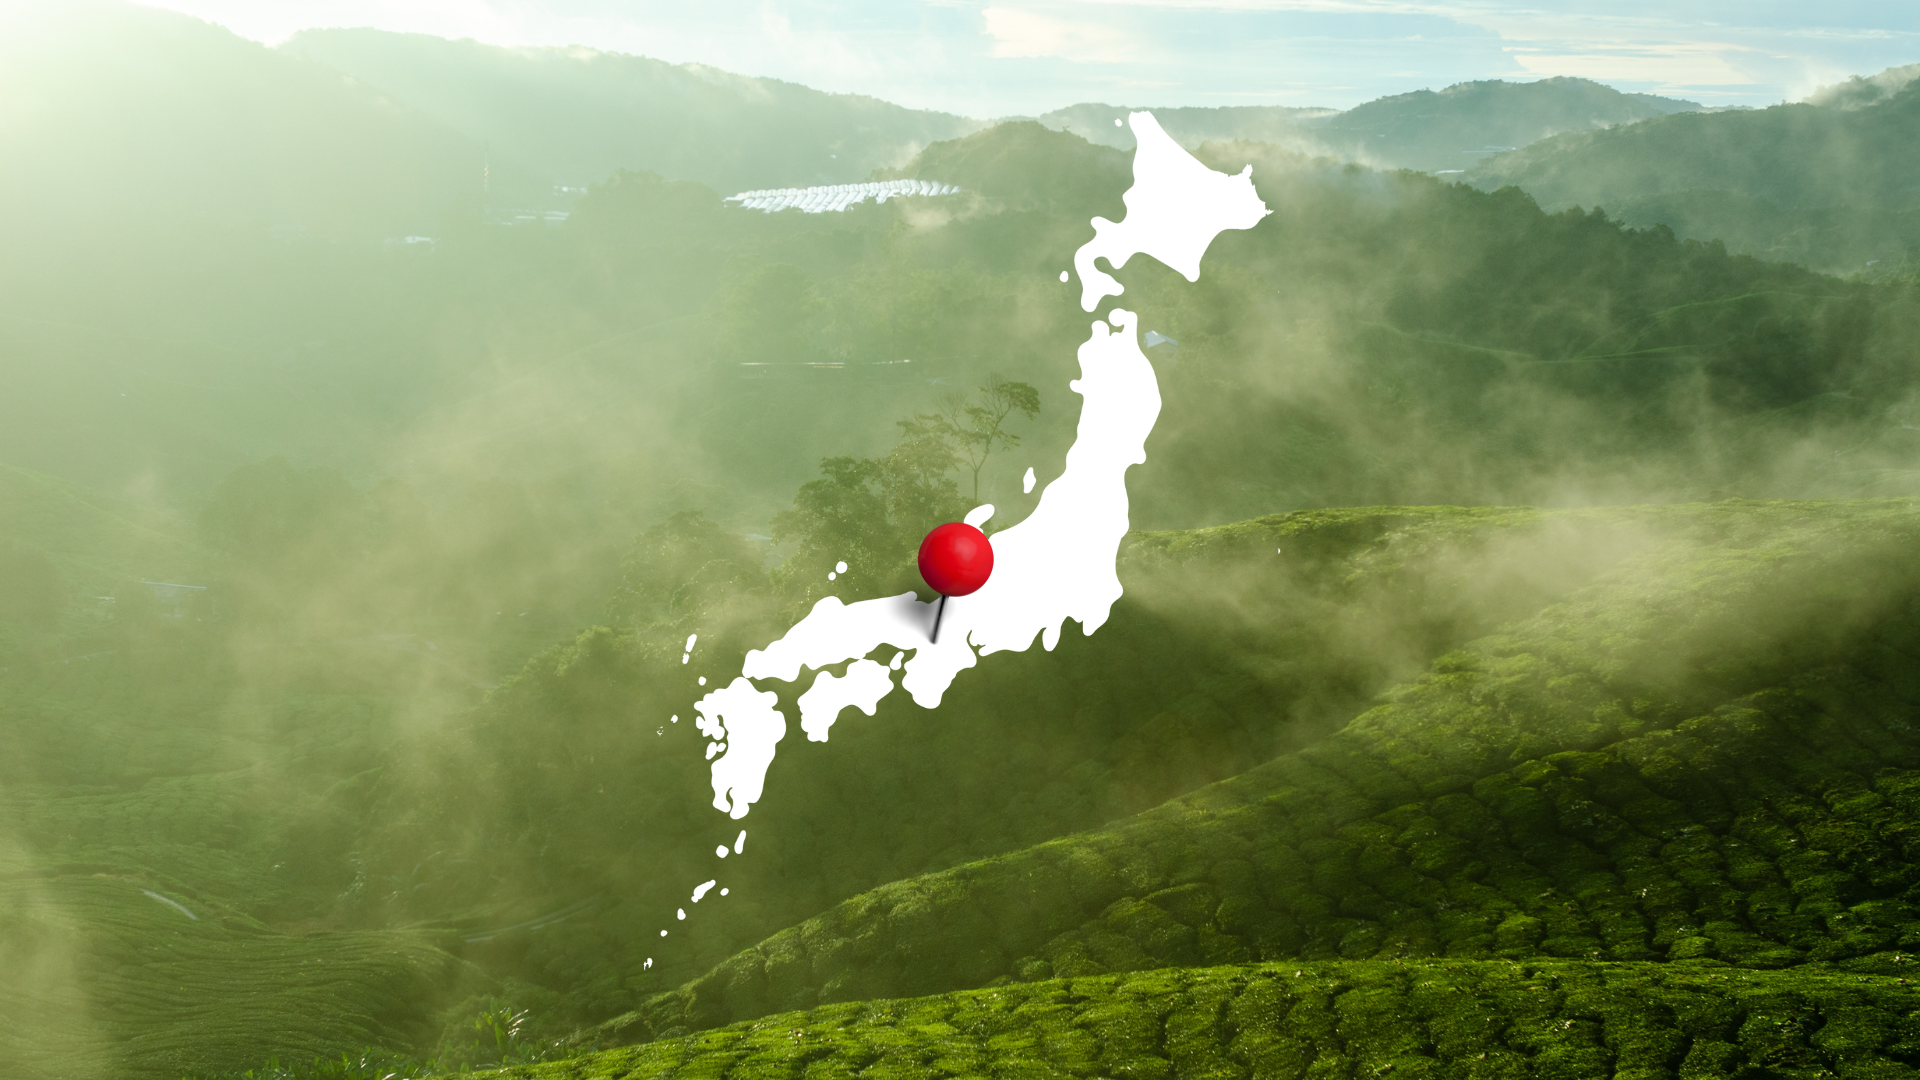 Kyoto tea fields with a map of Japan